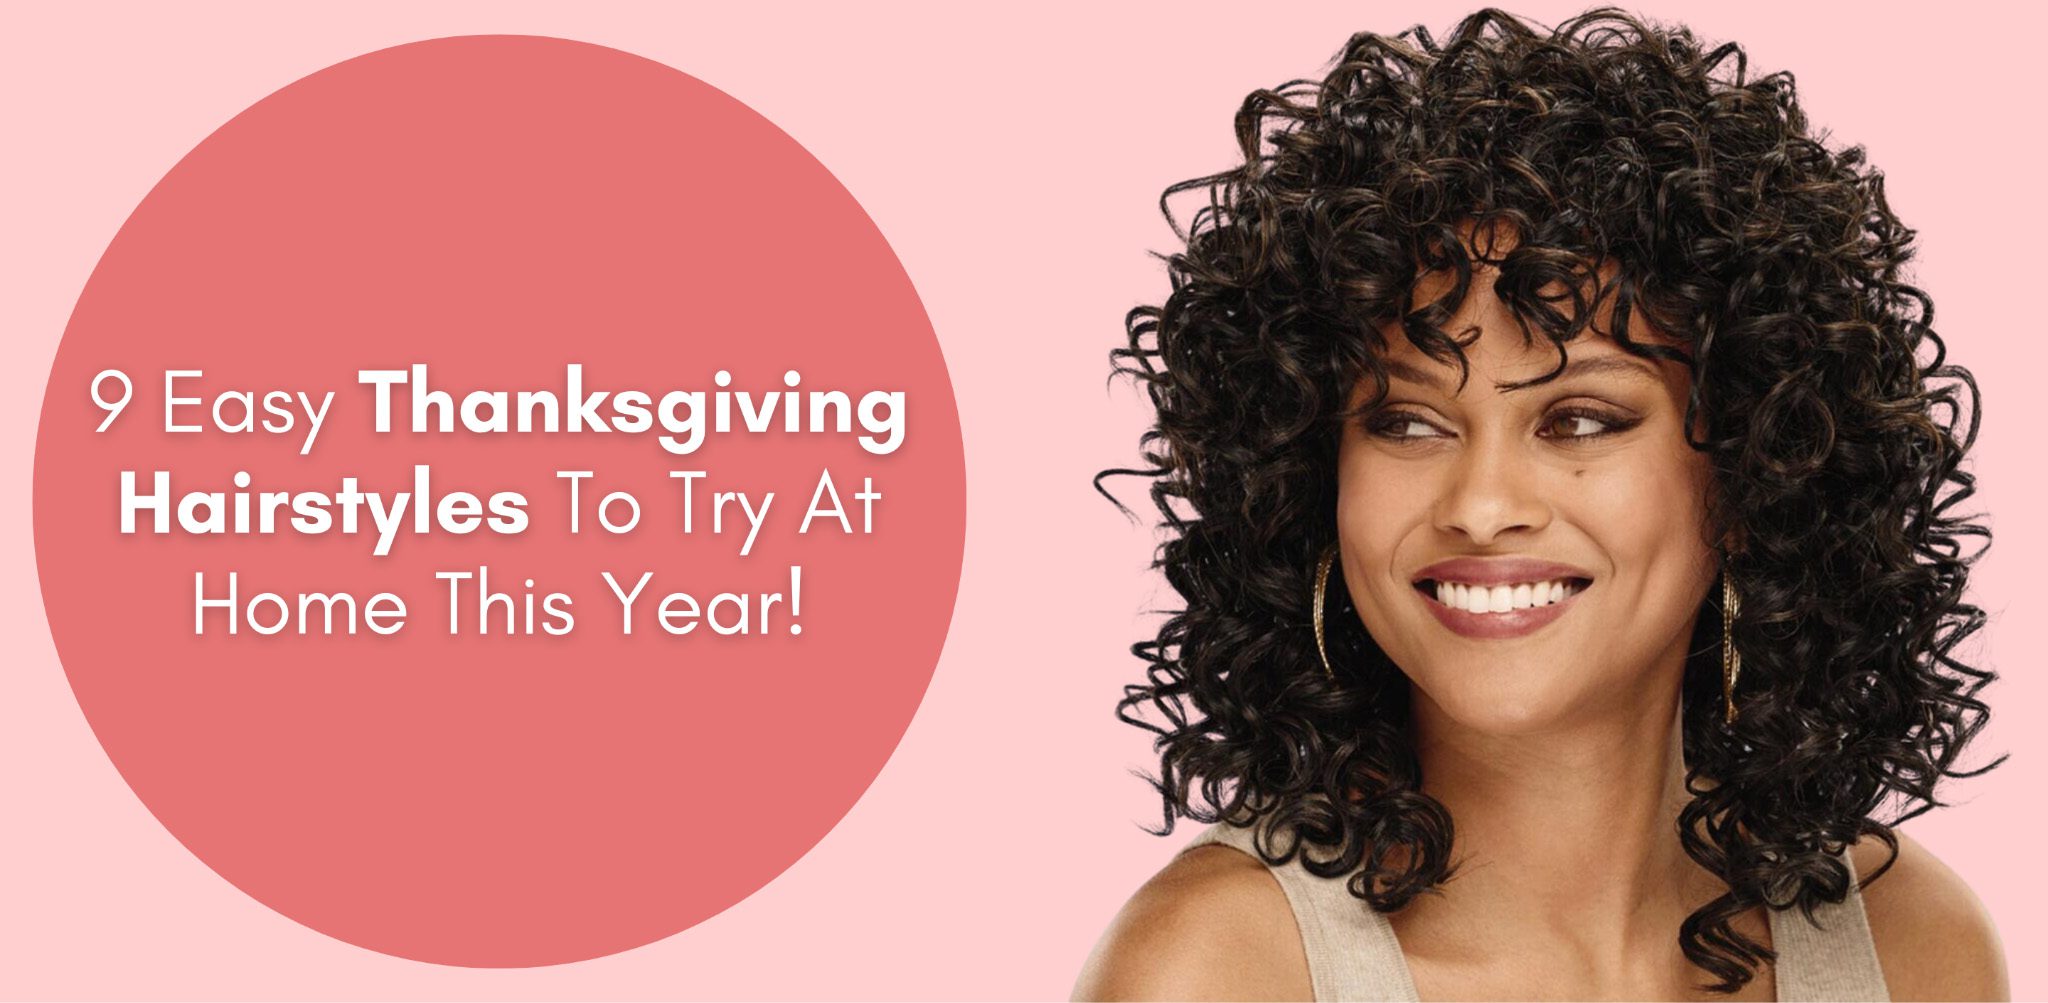 9 Easy Thanksgiving Hairstyles To Try At Home This Year!